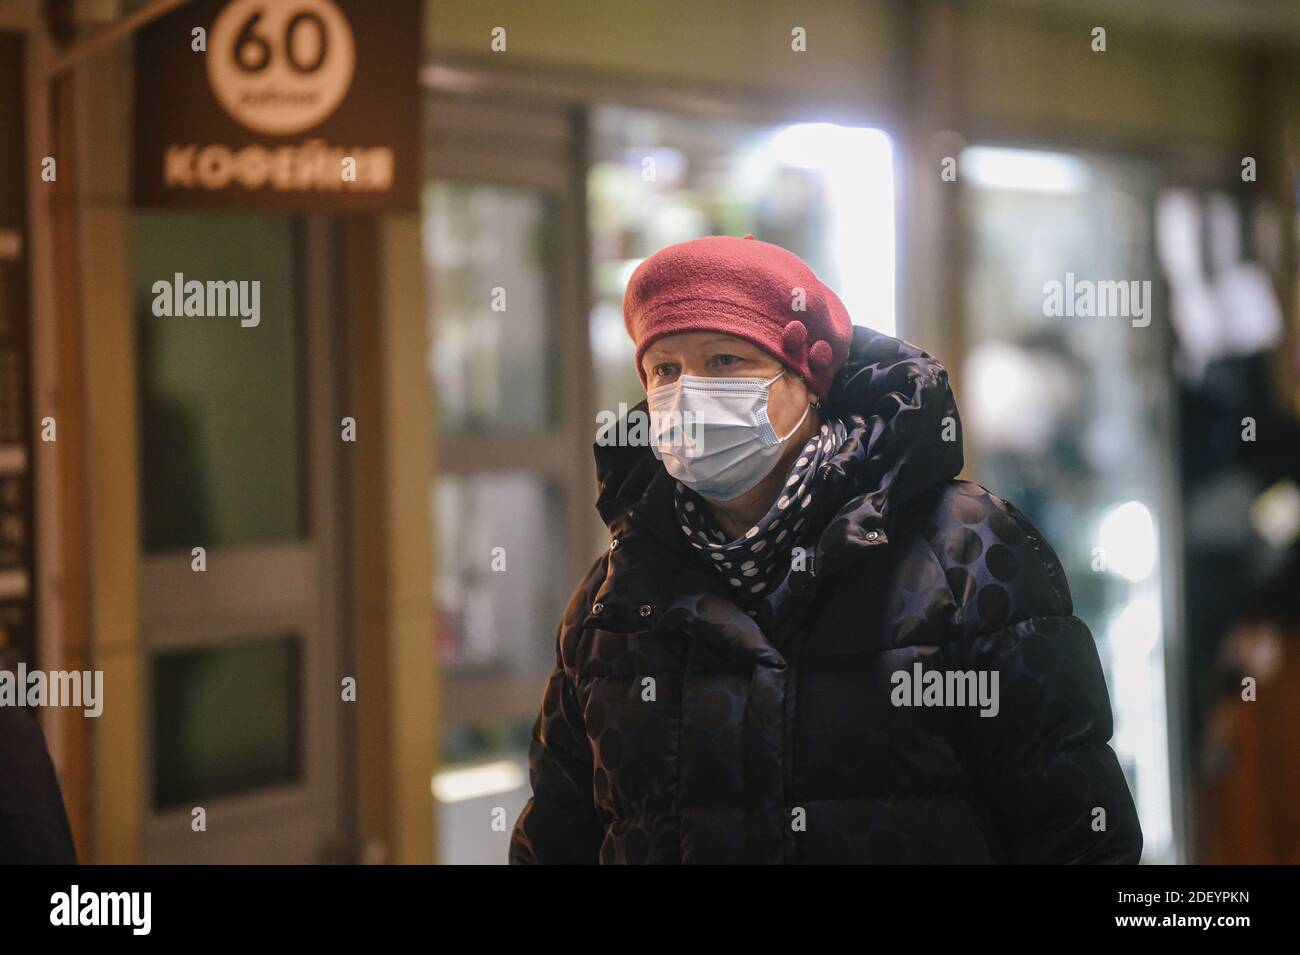 (201202) -- MOSCOW, Dec. 2, 2020 (Xinhua) -- A woman wearing a protective mask walks on the street in Moscow, Russia, on Dec. 2, 2020. Russia recorded 25,345 more COVID-19 infections over the past 24 hours, bringing the national tally to 2,347,401, the country's COVID-19 response center said Wednesday. (Xinhua/Evgeny Sinitsyn) Stock Photo